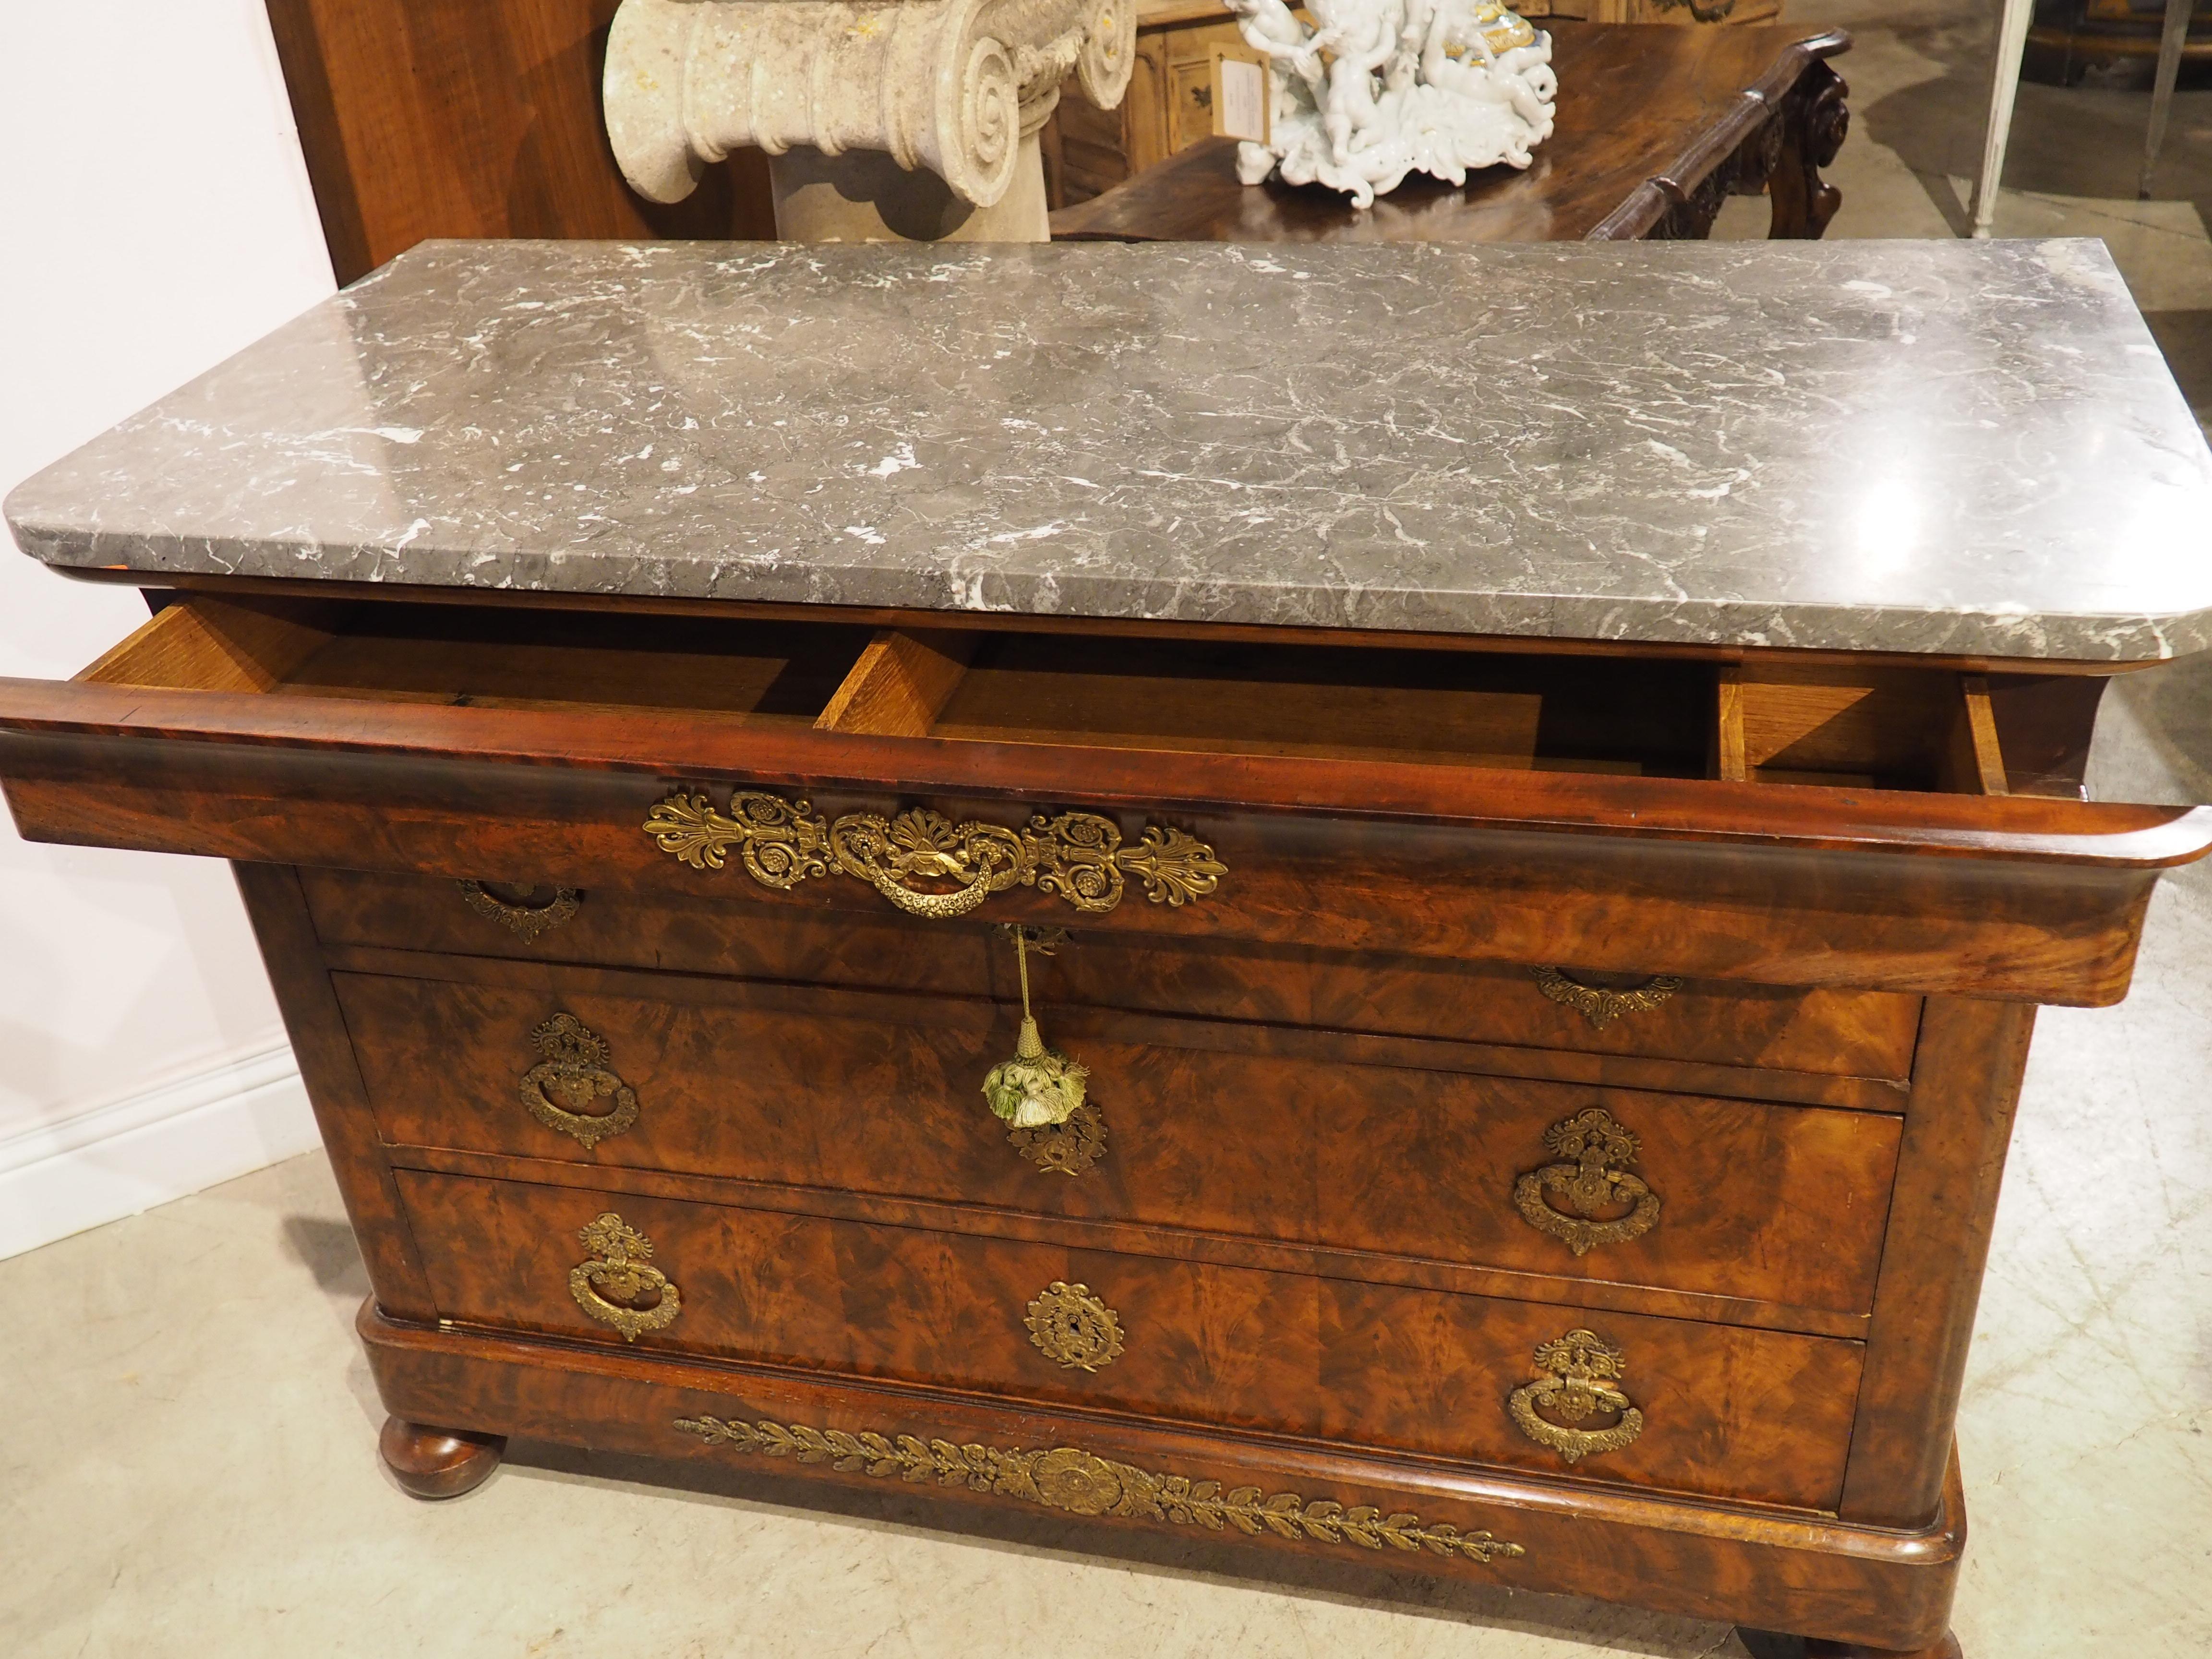 Circa 1820 French Restauration Commode in Flame Mahogany, Gilt Bronze Hardware For Sale 4